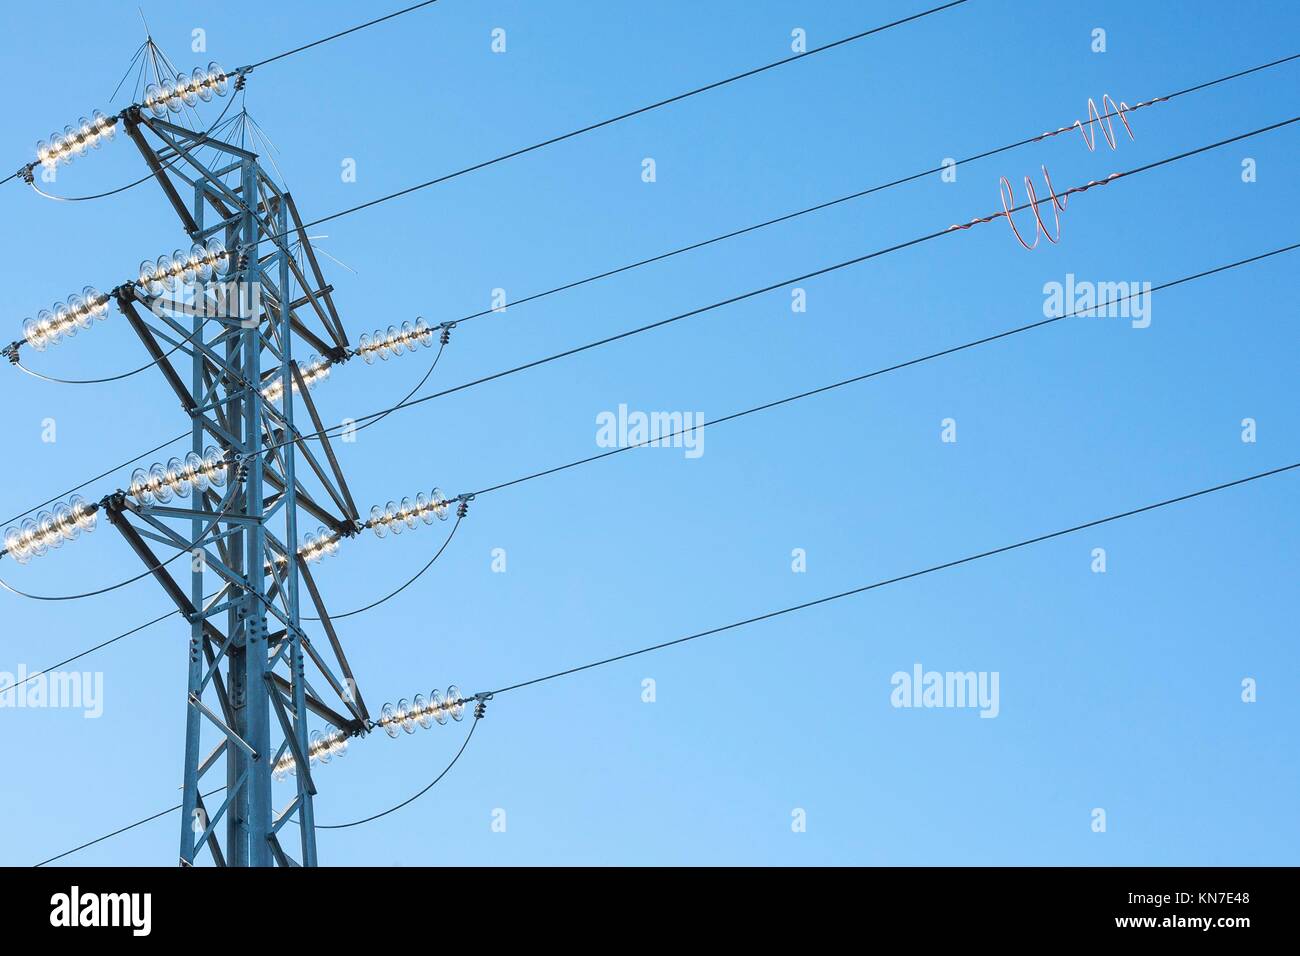 High voltage power pylons against blue sky. Low view. Stock Photo